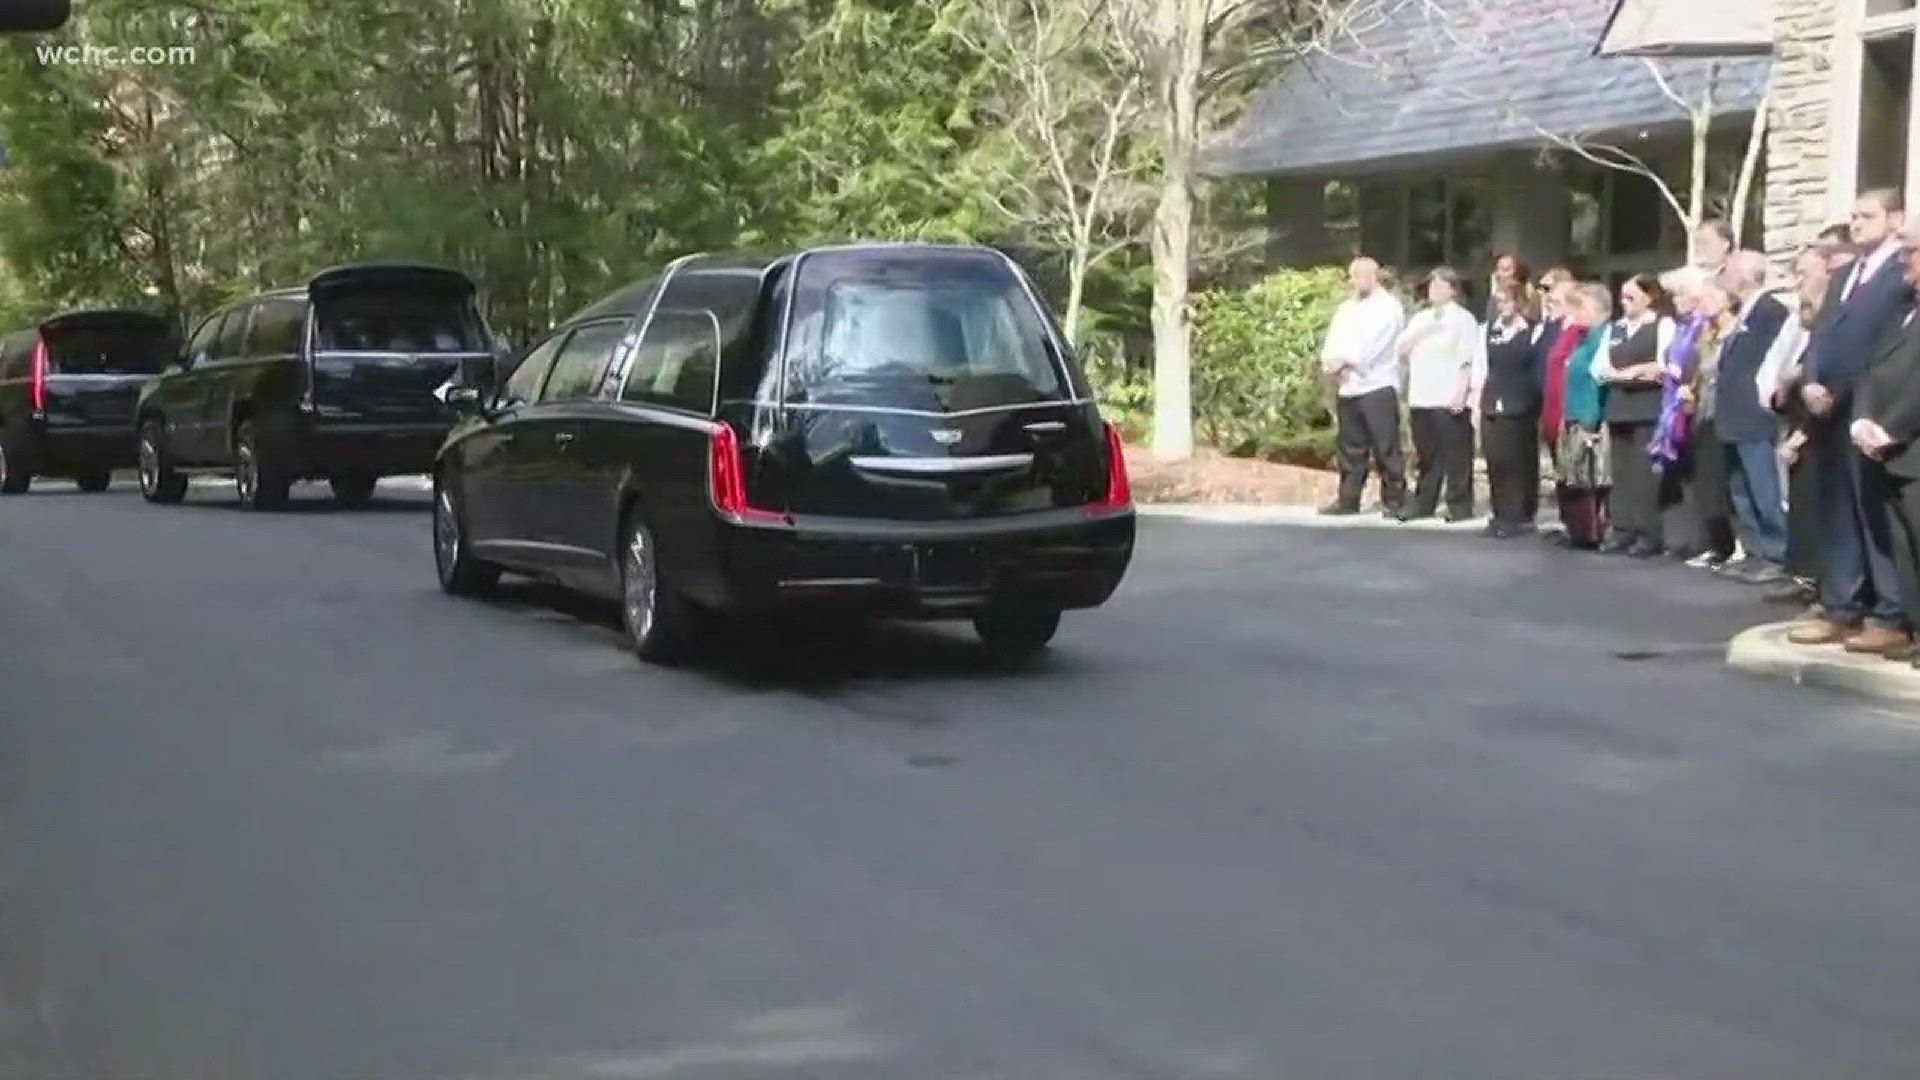 The casket of Rev. Billy Graham exits The Cove in Montreat, en route to the Billy Graham Library in Charlotte.